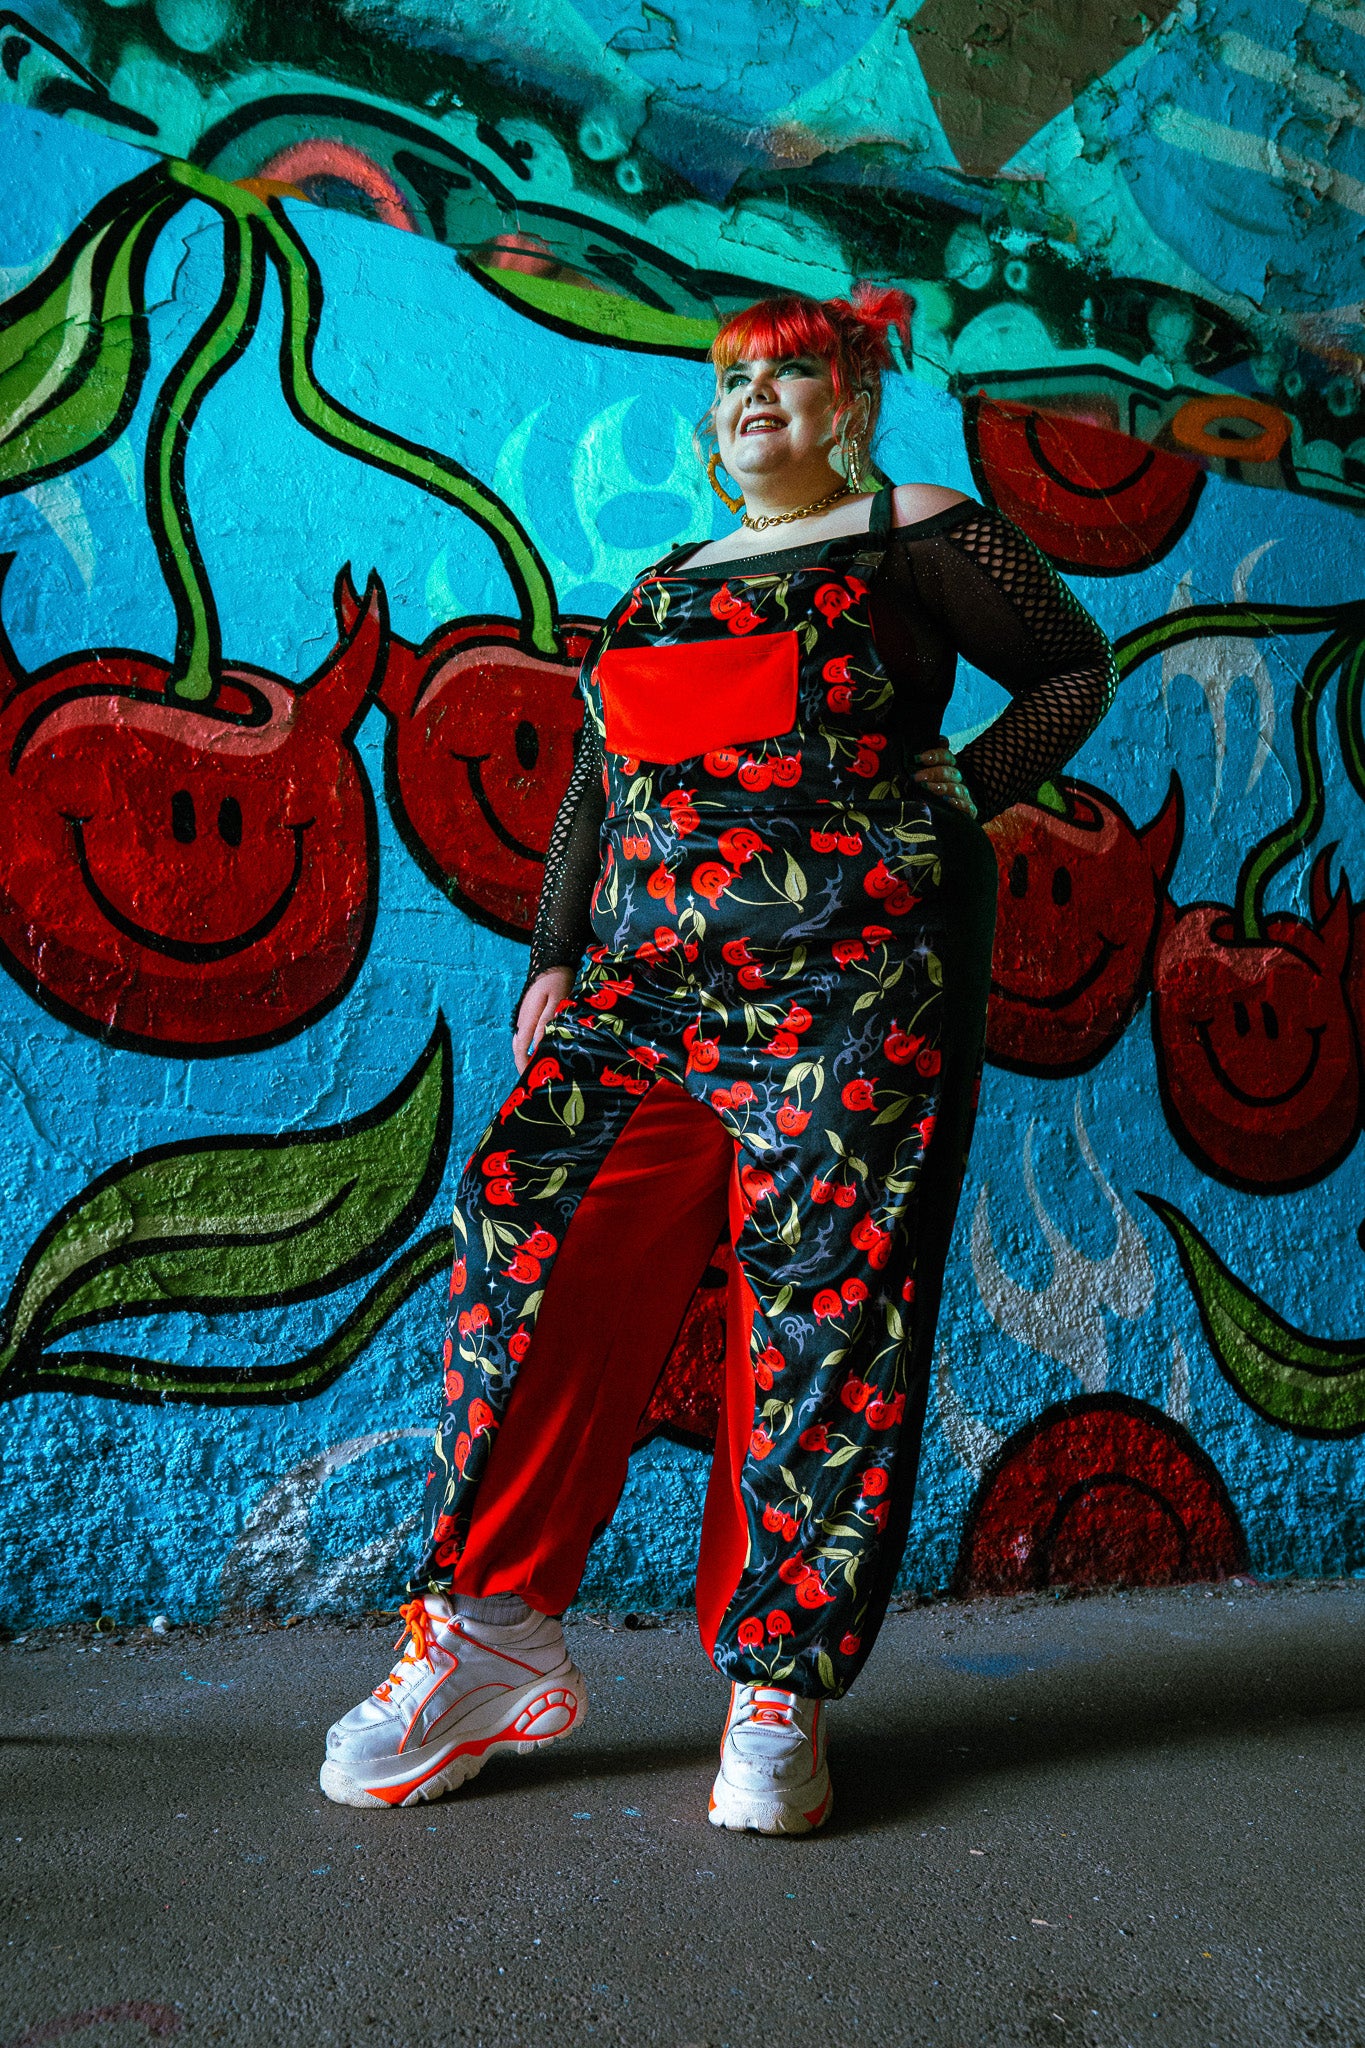 Bellisa X Hiccup cherry print velvet velour dungarees. For everyday wear, punk looks, festival wear. Unique handmade sustainably in the uk 